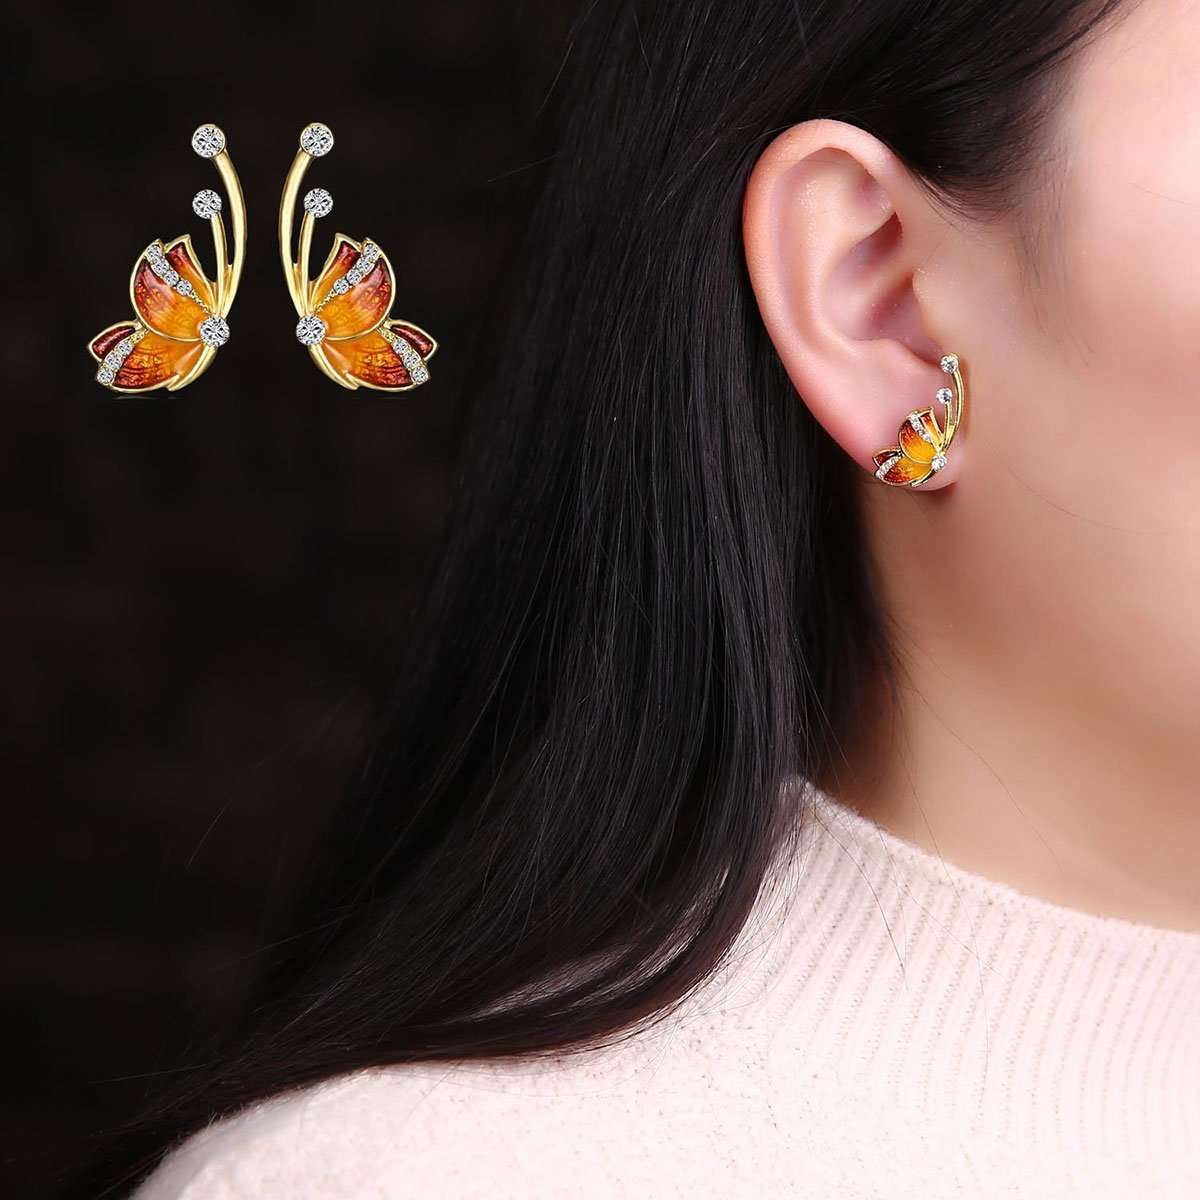 Brown and Gold Butterfly Earrings with Rhinestones - My Custom Tee Party